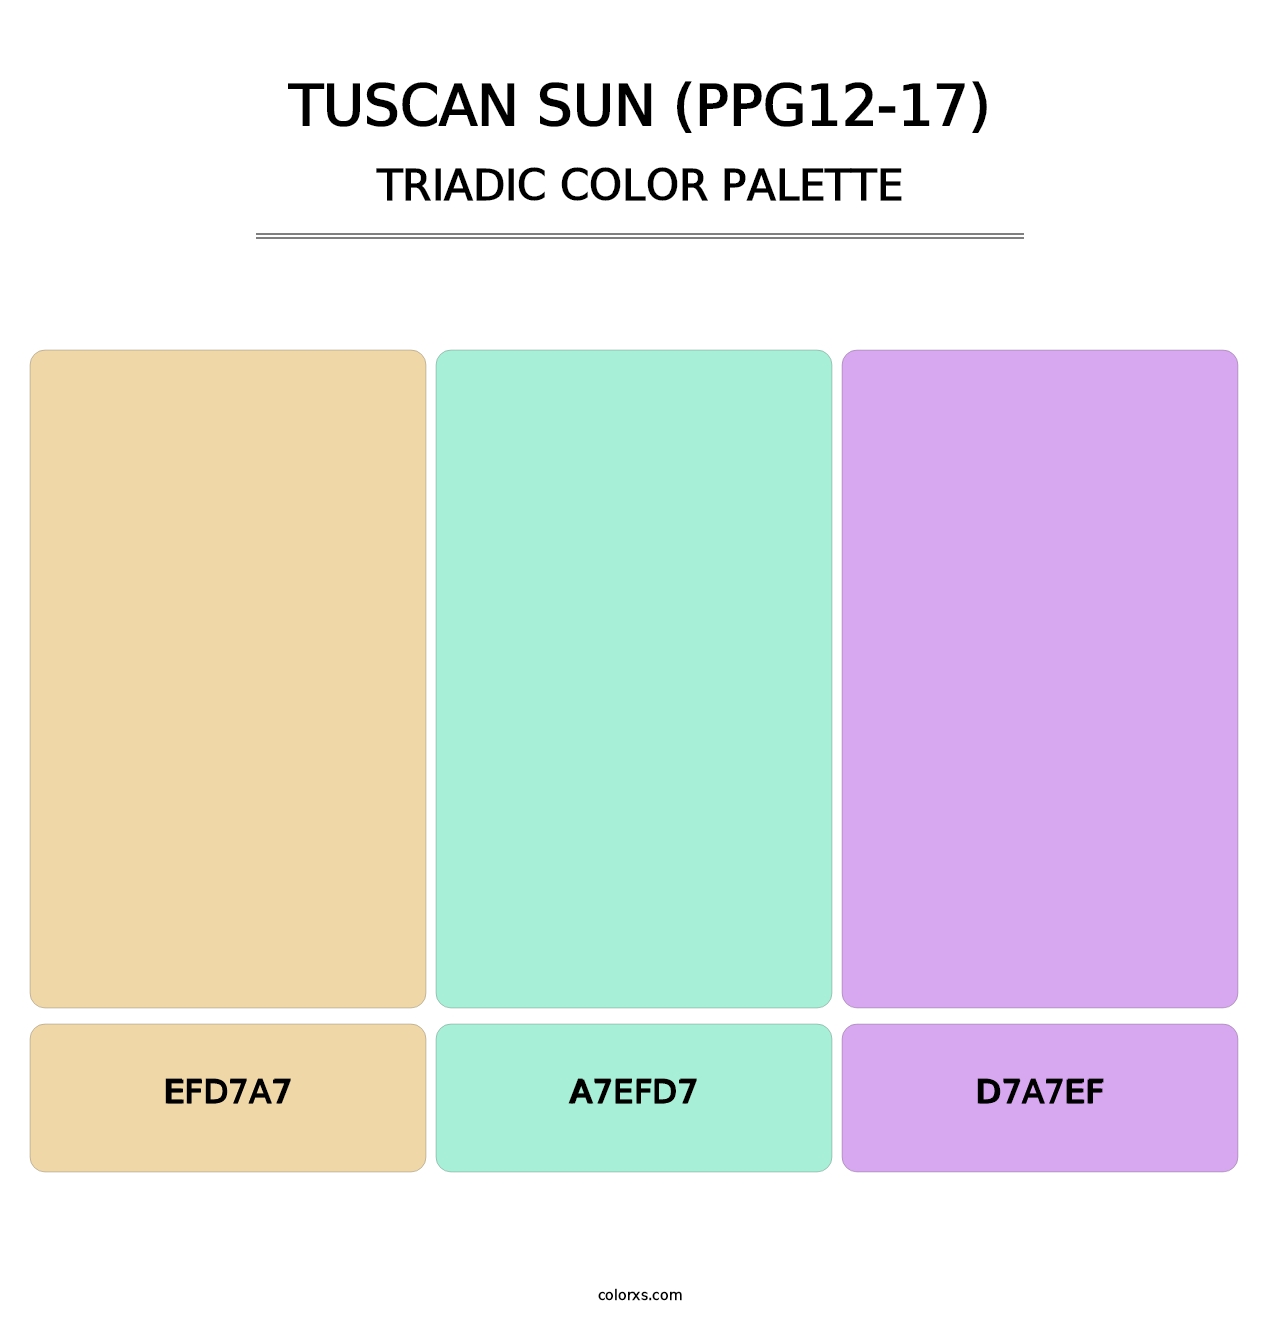 Tuscan Sun (PPG12-17) - Triadic Color Palette